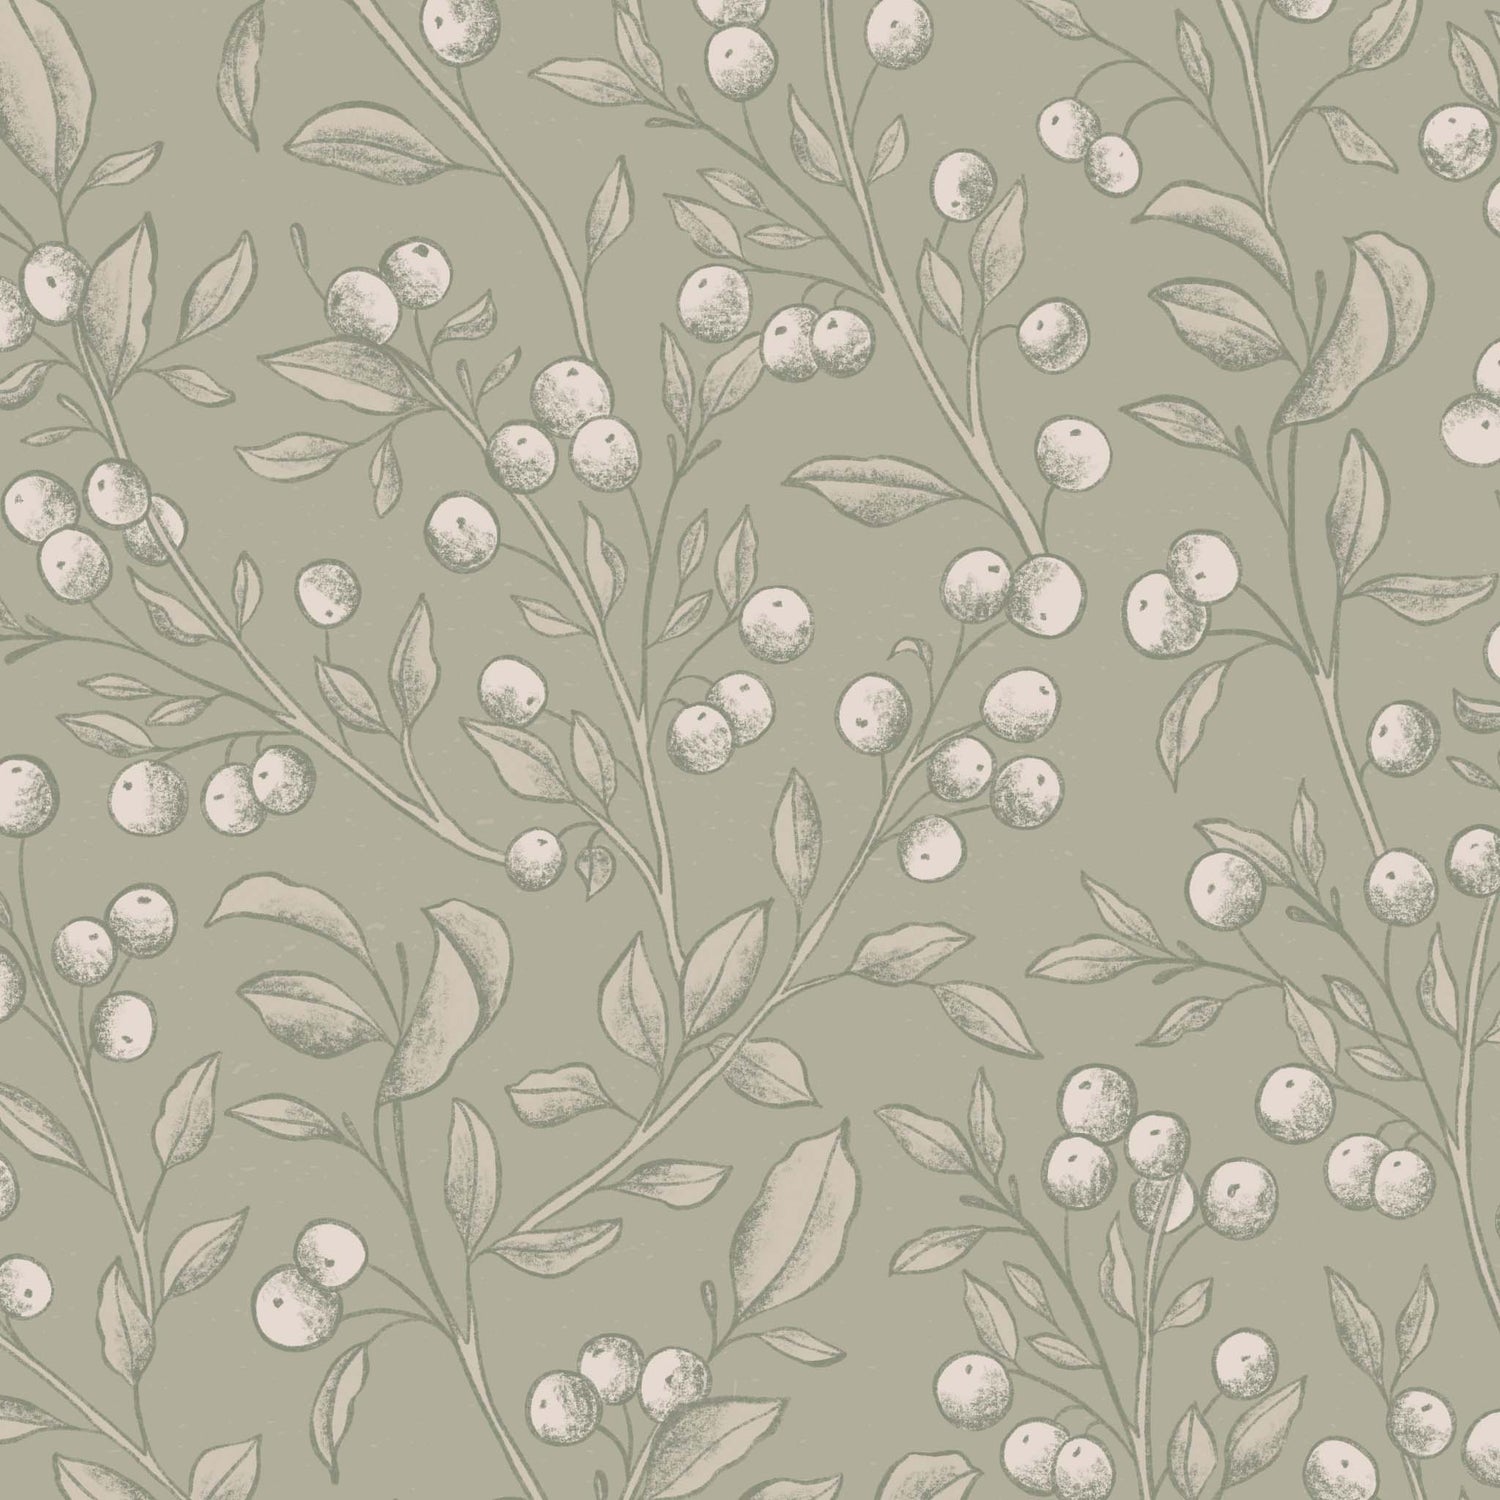 Zoomed in view of our Berries Wallpaper in Dry Sage is a peel and stick, removable wallpaper with hand-drawn sketched berries in dry sage and white by artist Mariah Cottrell.